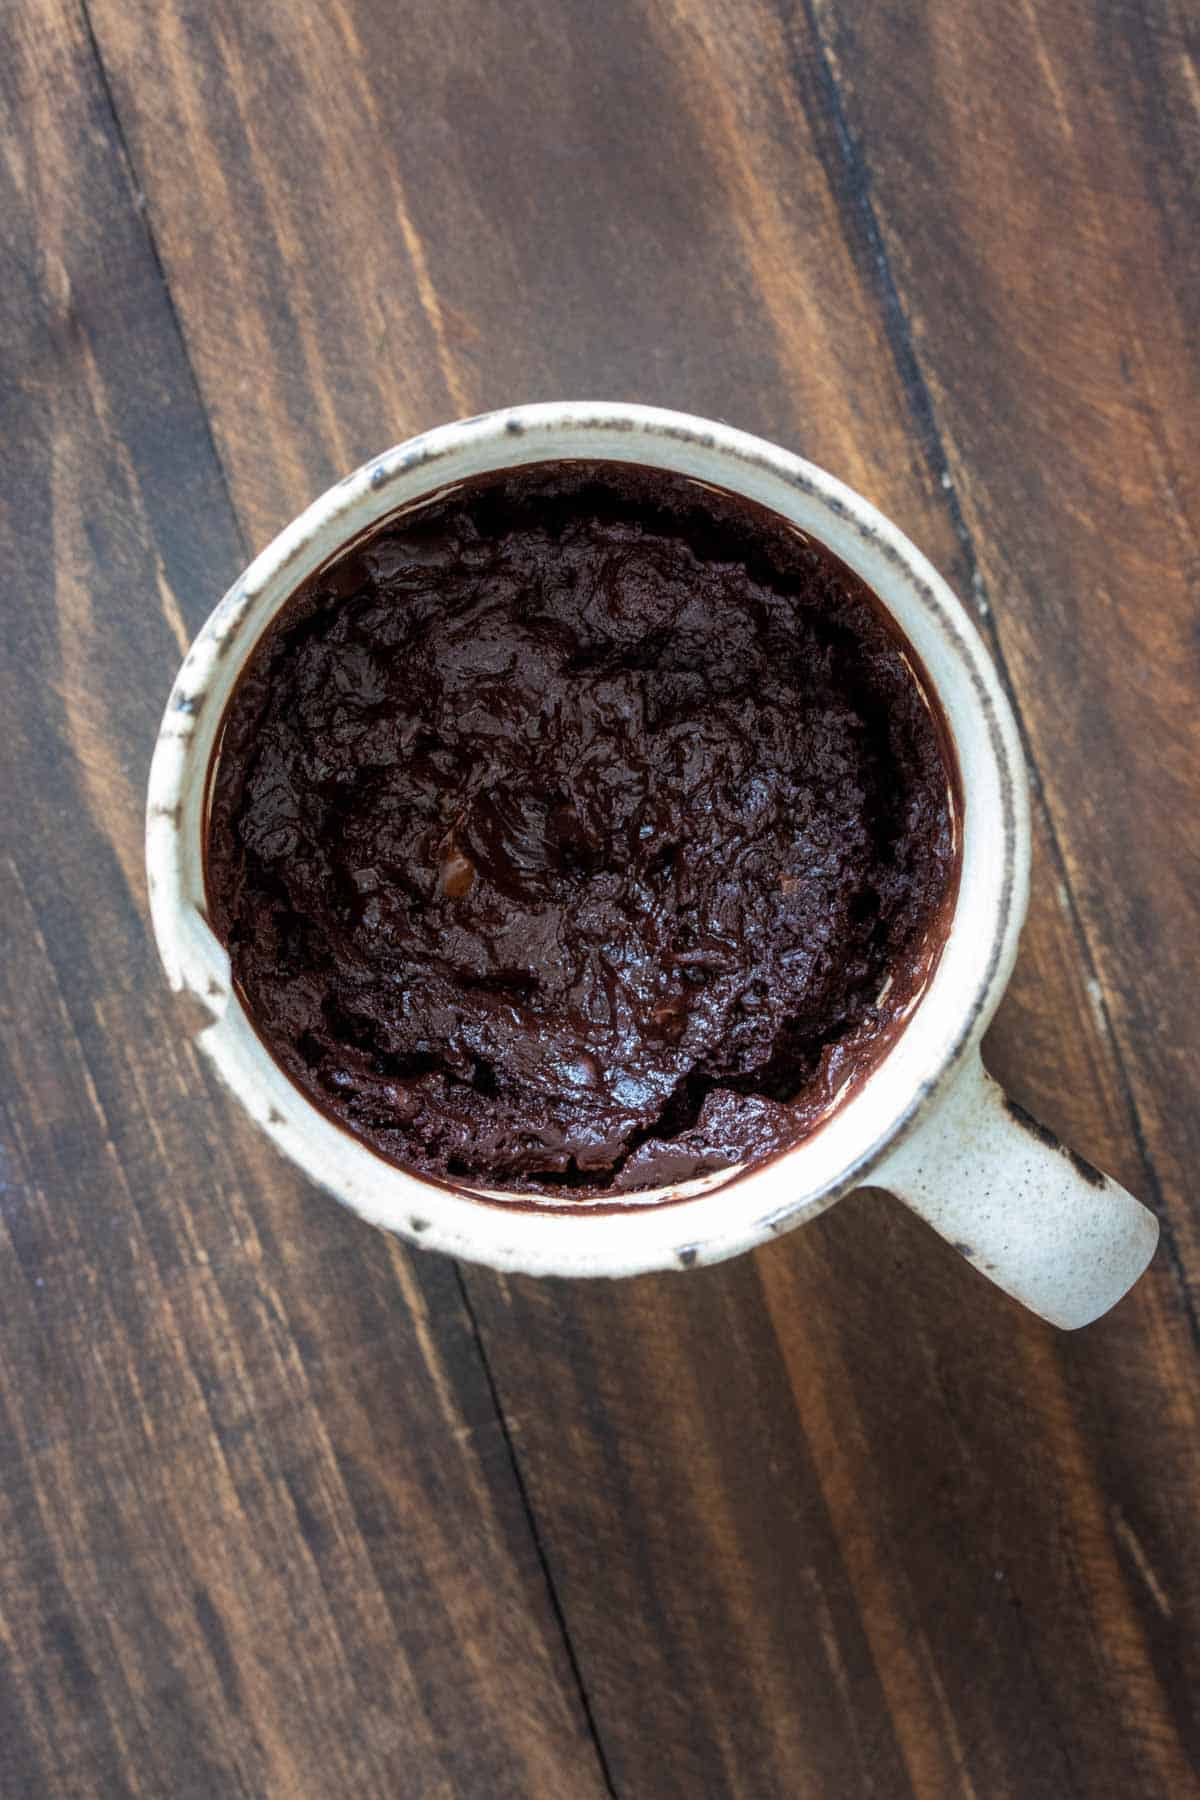 Top view of cooked chocolate cake in a cream mug